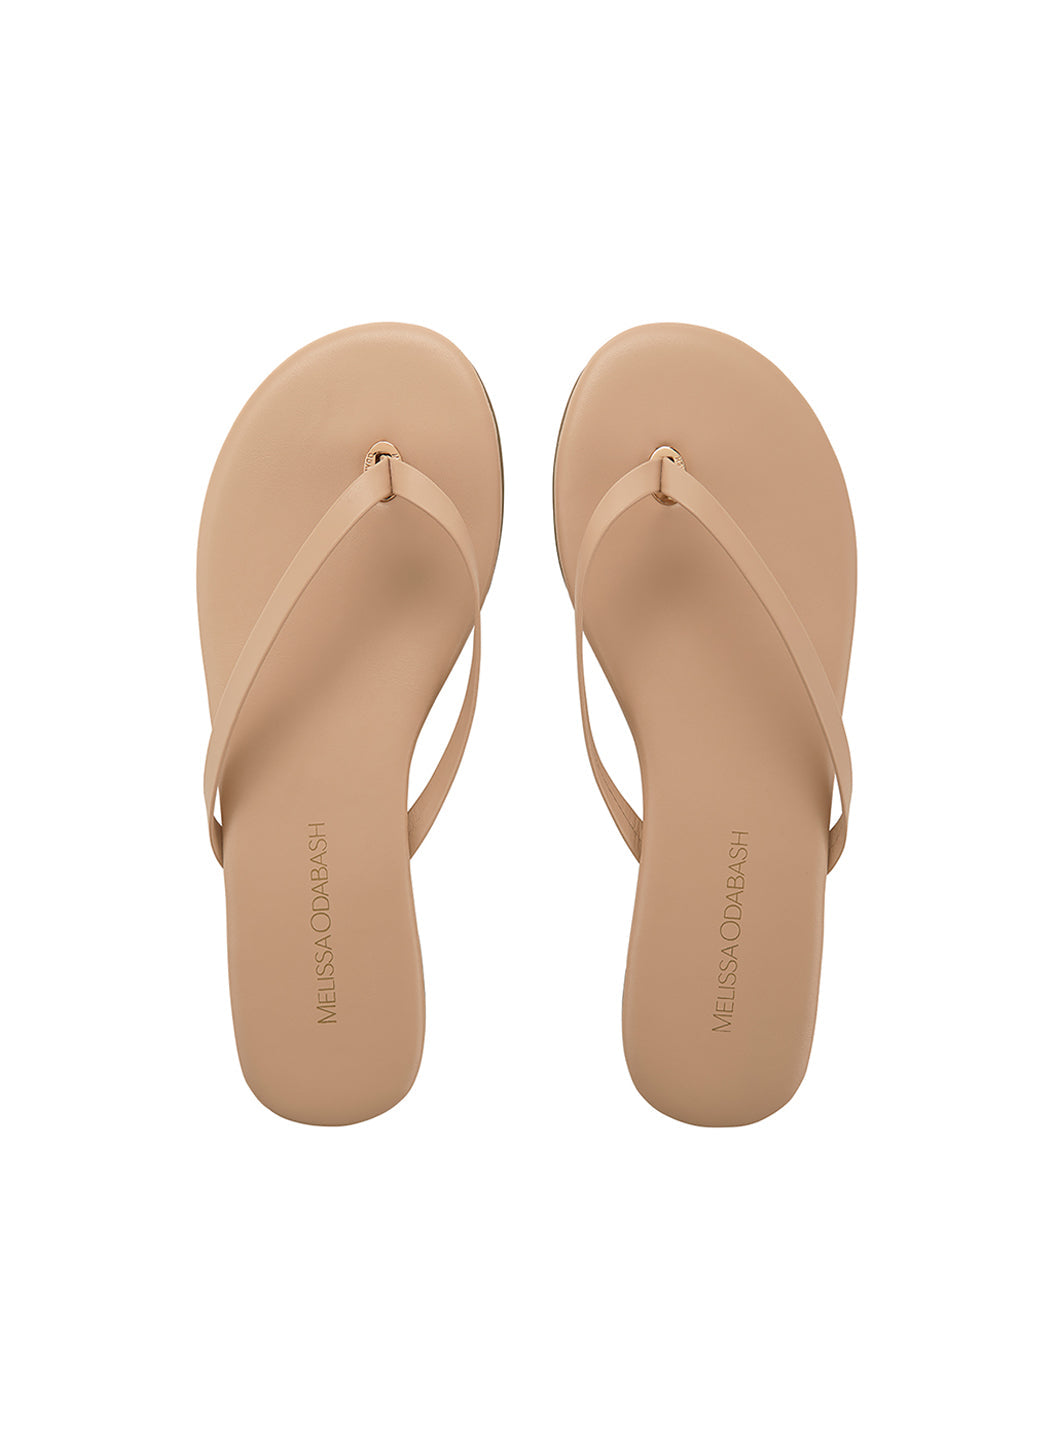 Thong Flip Flop in nude by Solei Sea Shoes